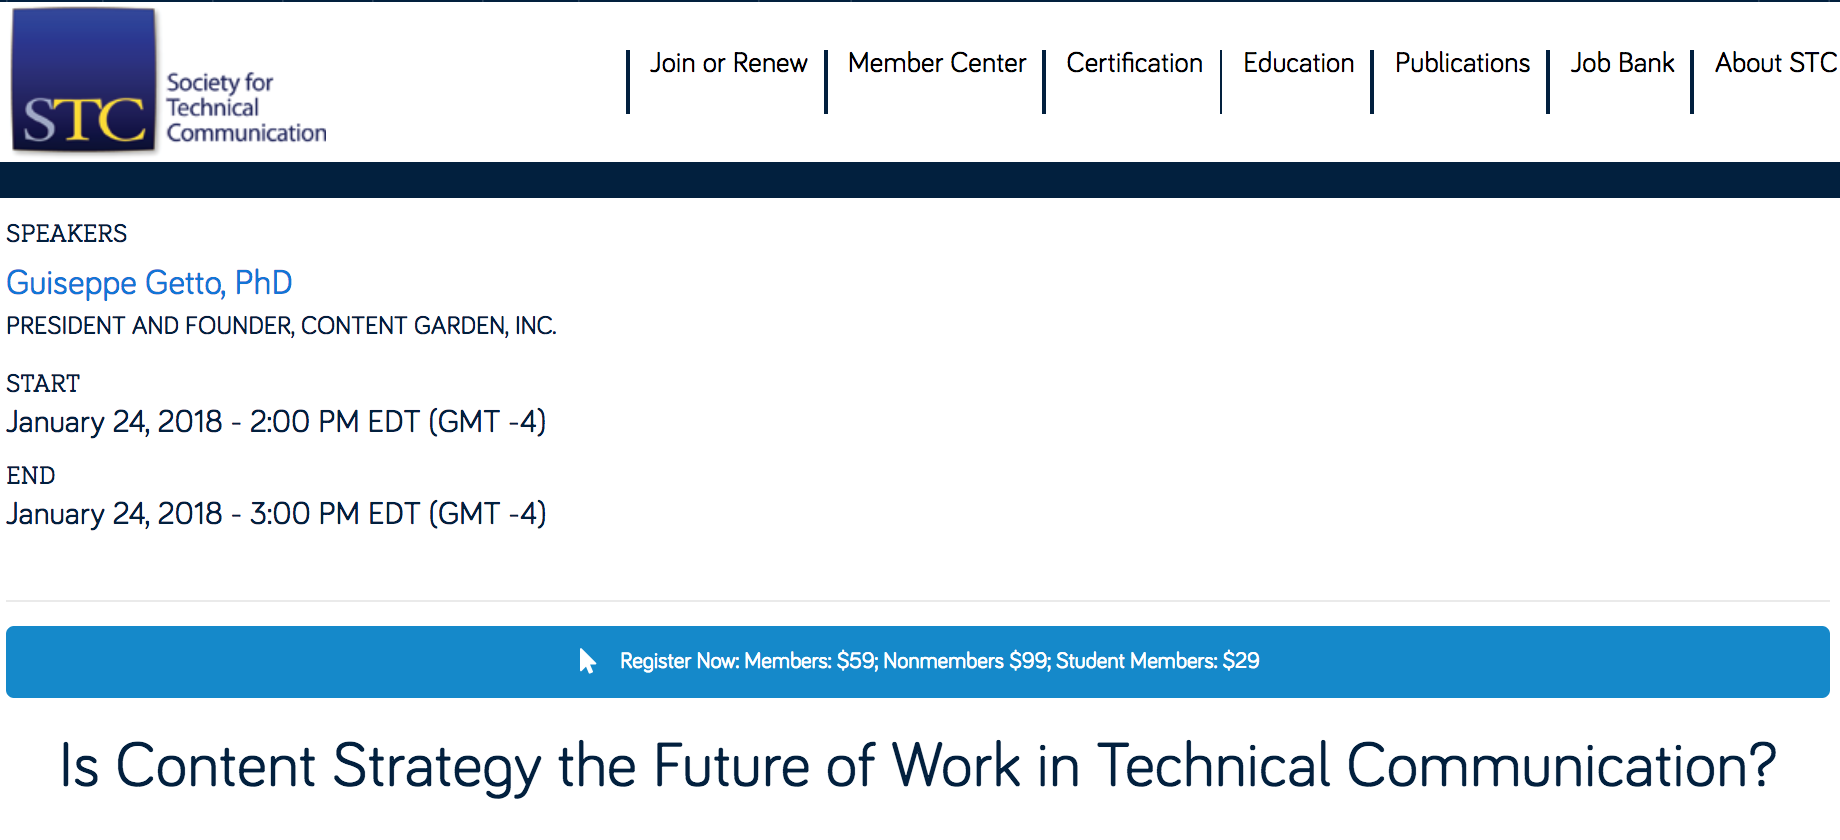 A screenshot of the sign-up button for "Is Content Strategy the Future of Work in Technical Communciation?" A webinar for the society for technical communication, published to: "Learn About Content Strategy And Technical Communication: A Webinar for the Society for Technical Communication"